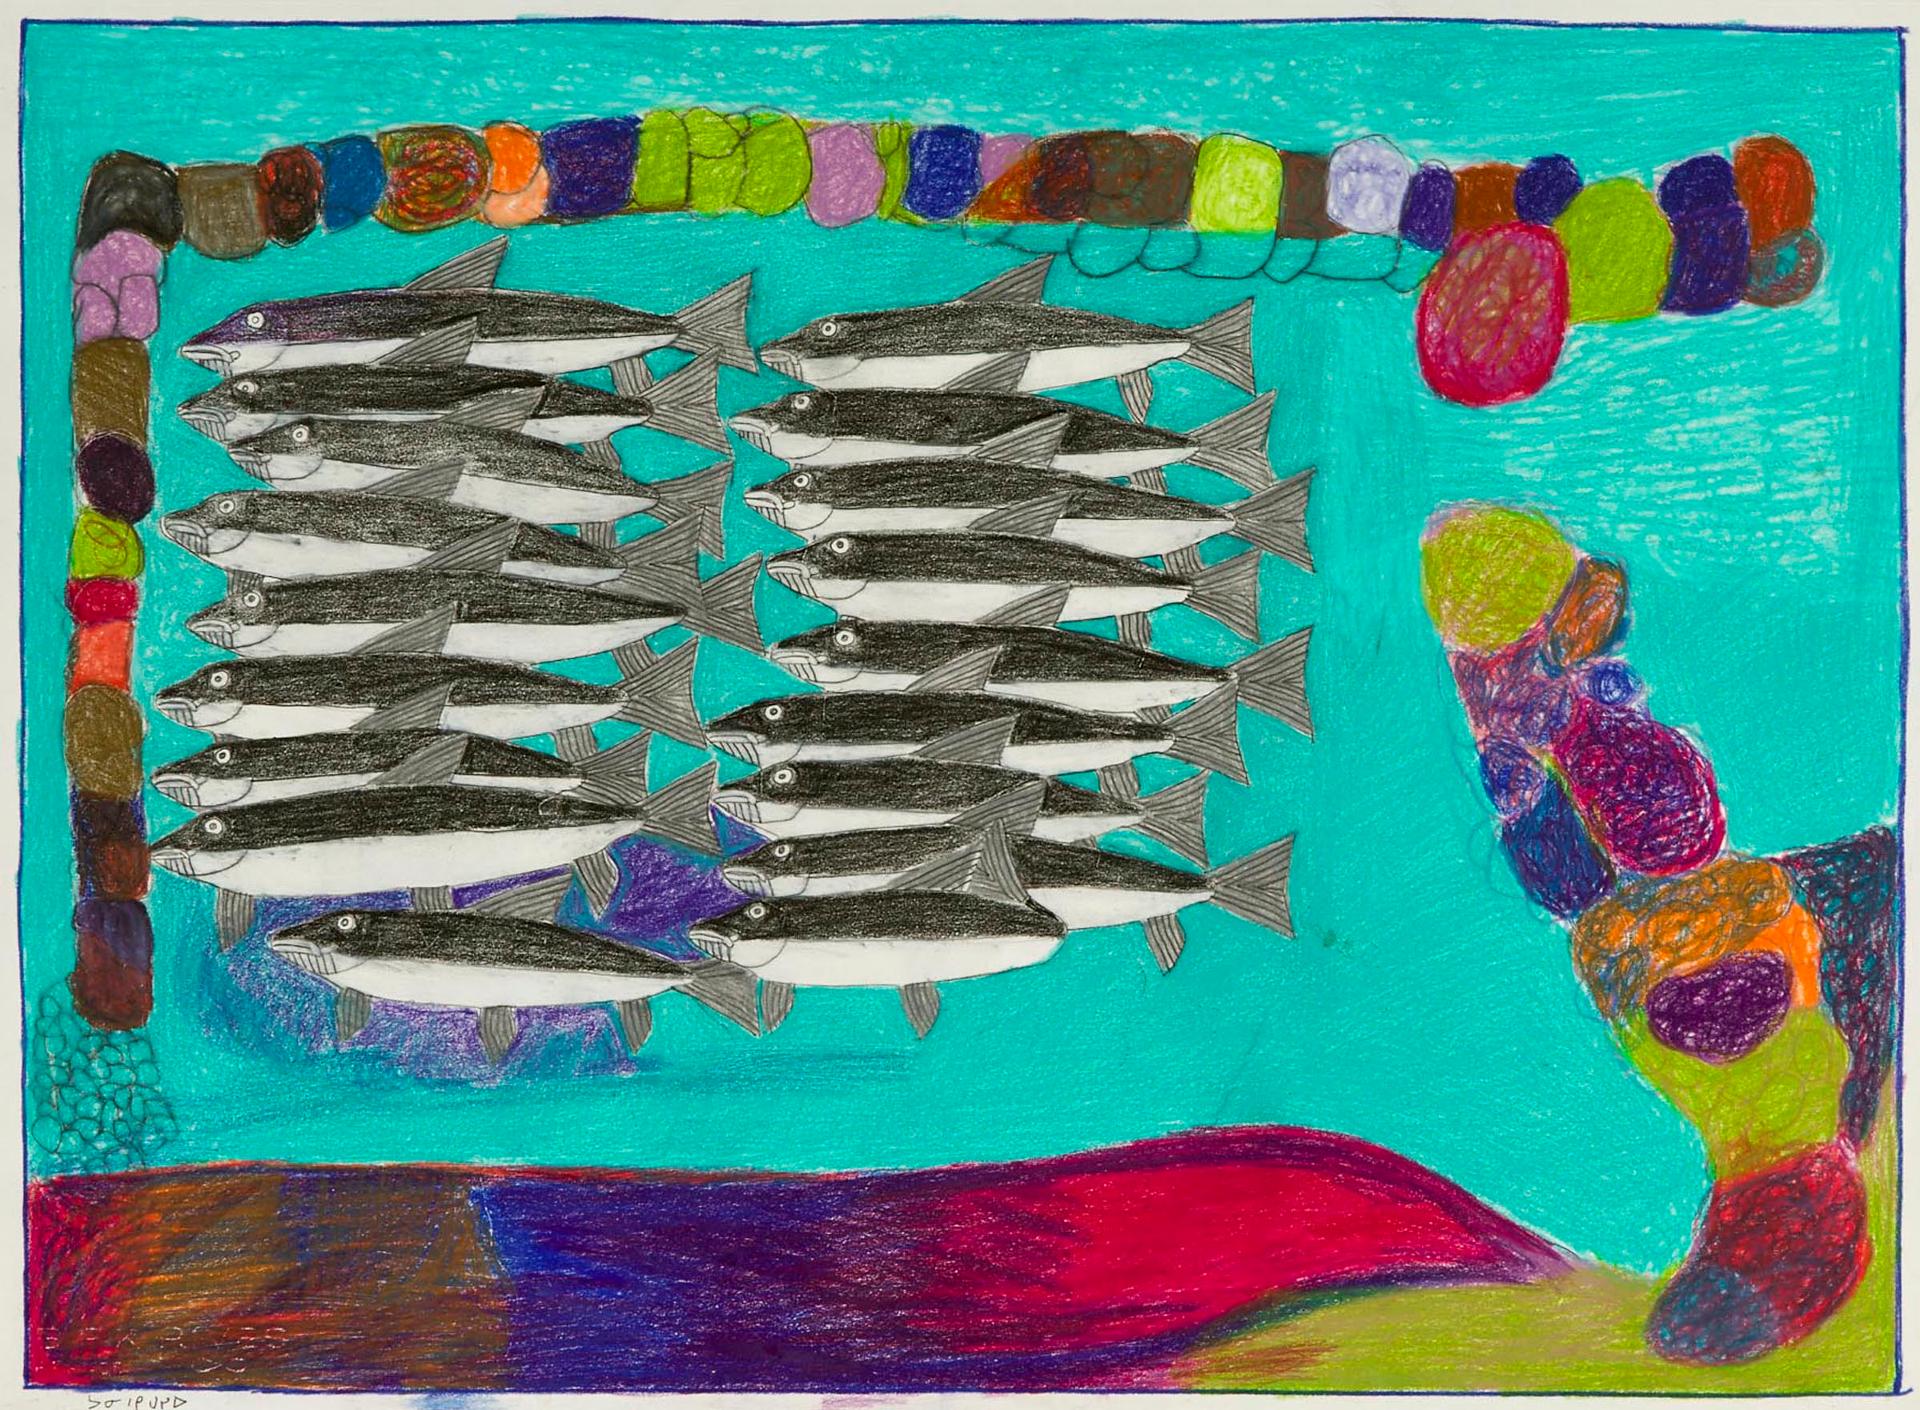 Janet Kigusiuq (1926-2005) - Untitled (Fish Caught In The Weir)